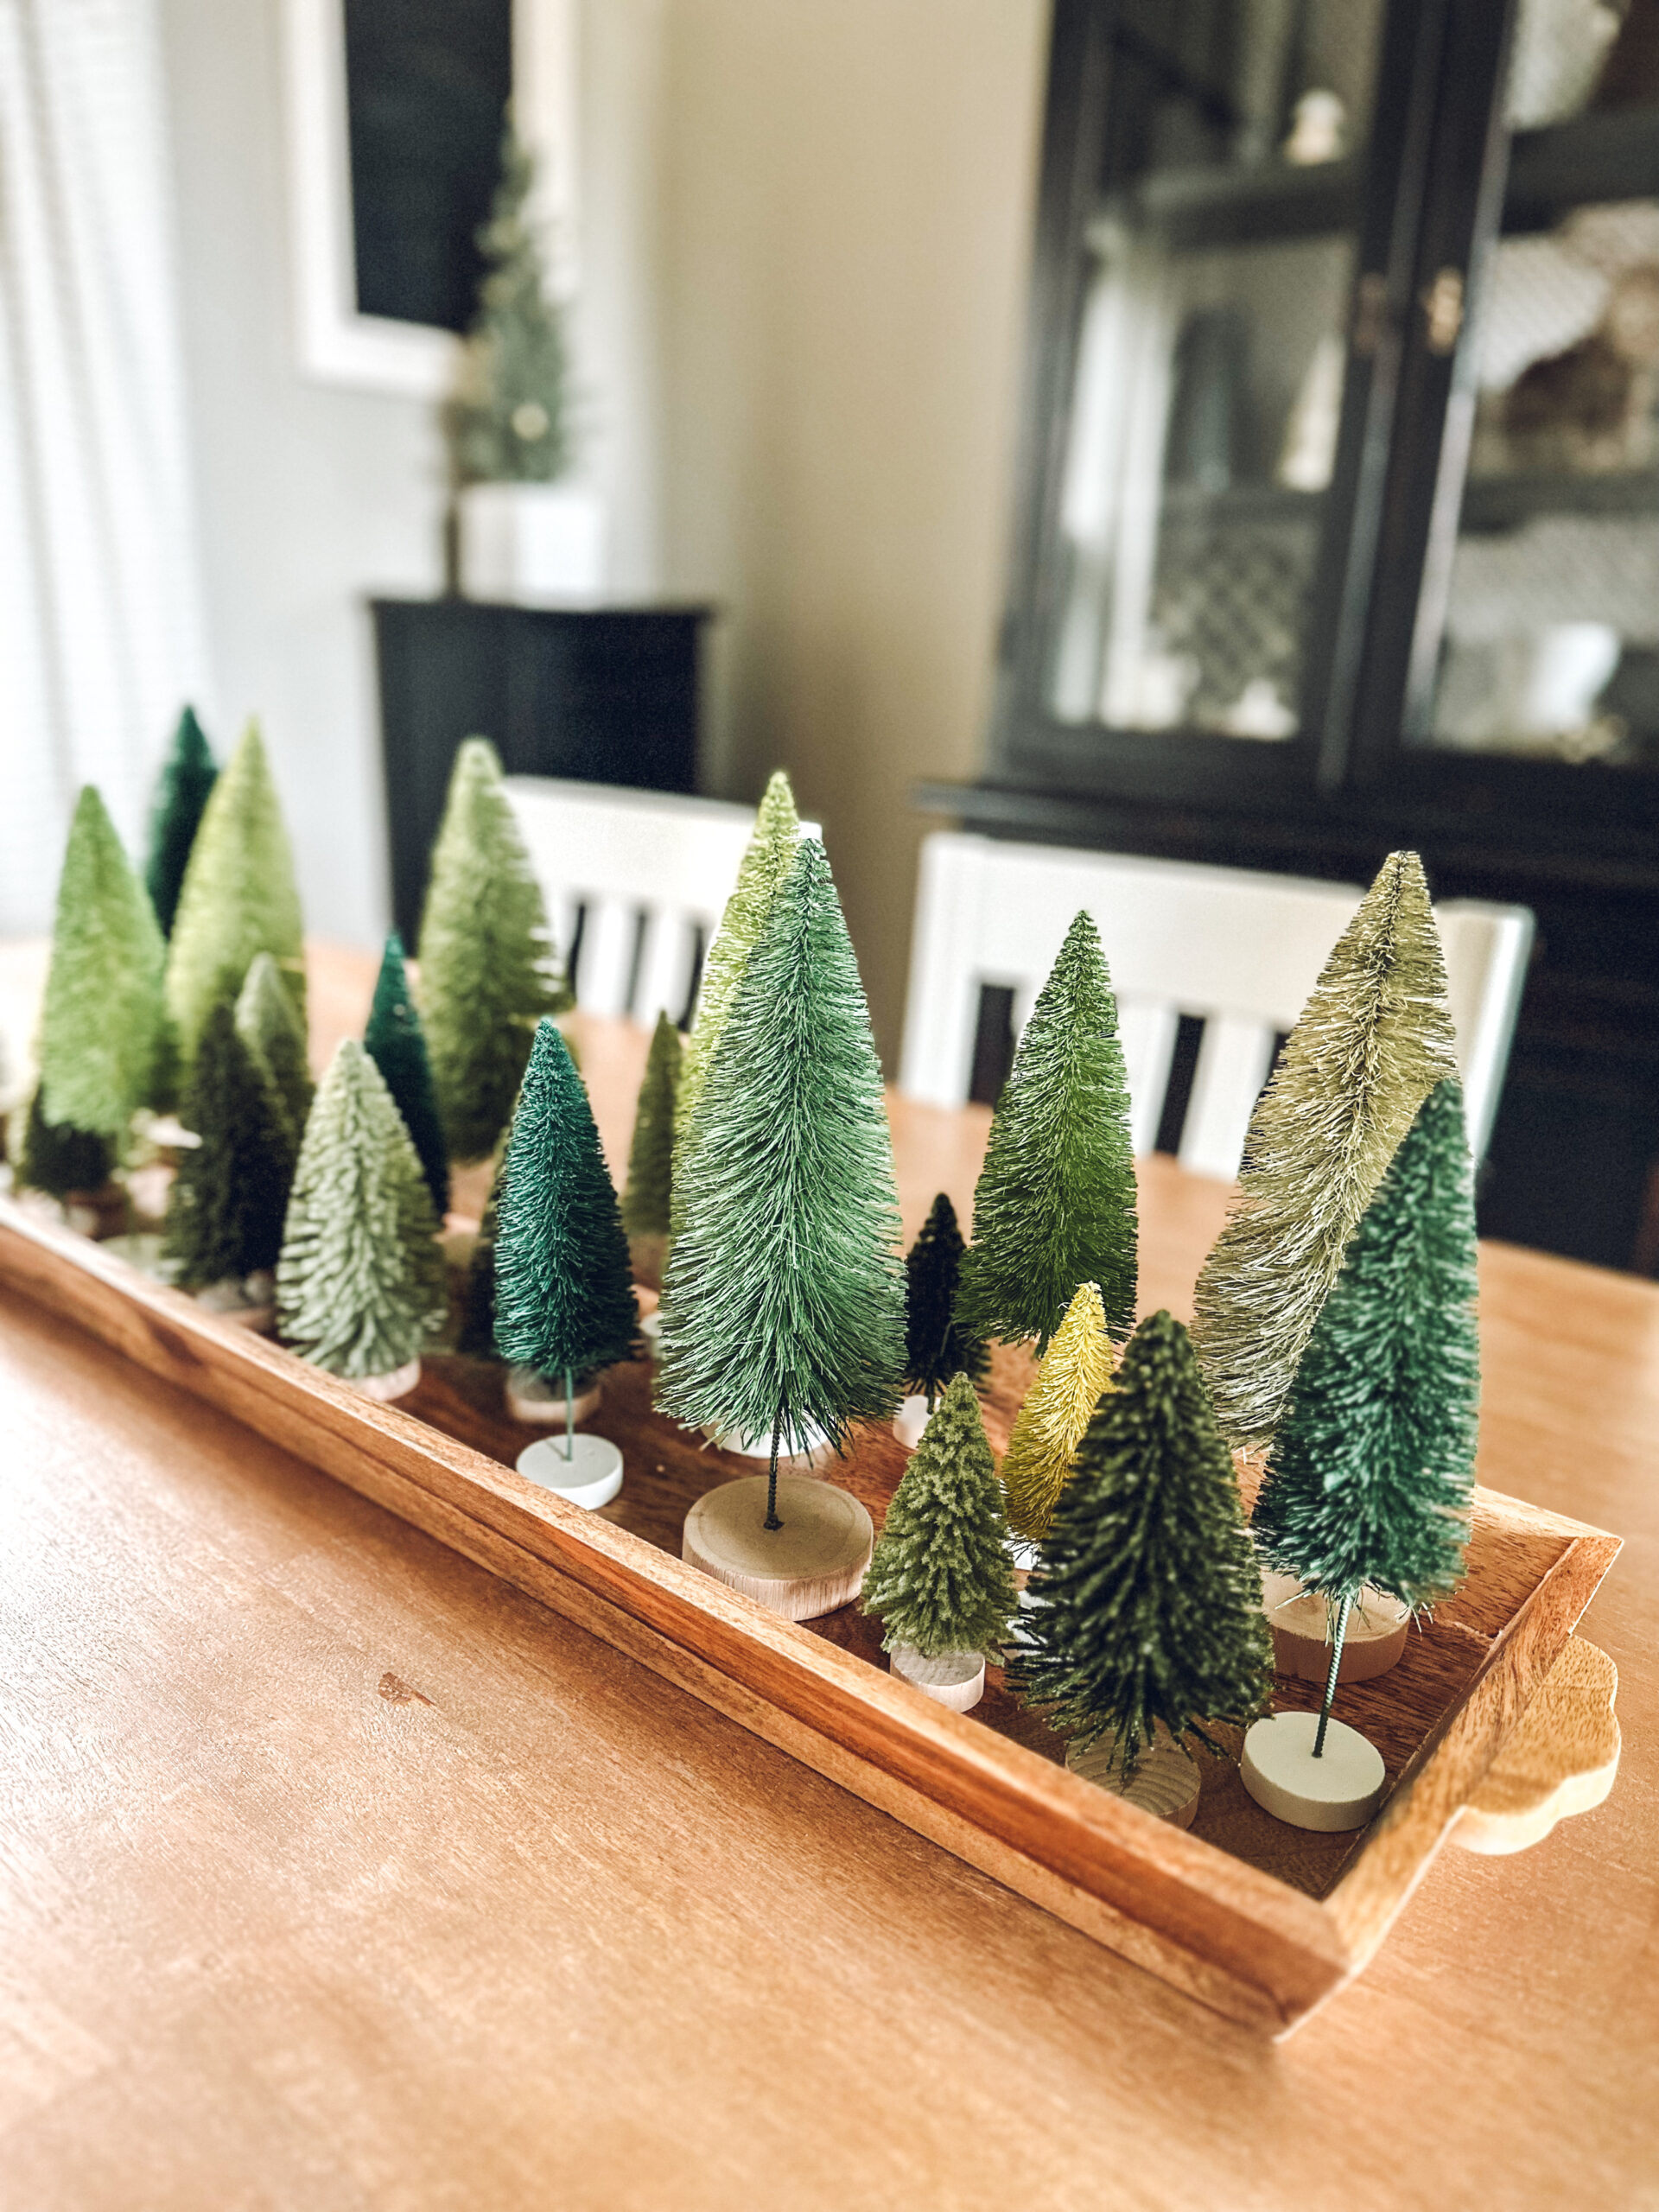 How to style a tray for Christmas? Fill it with bottle brush trees.